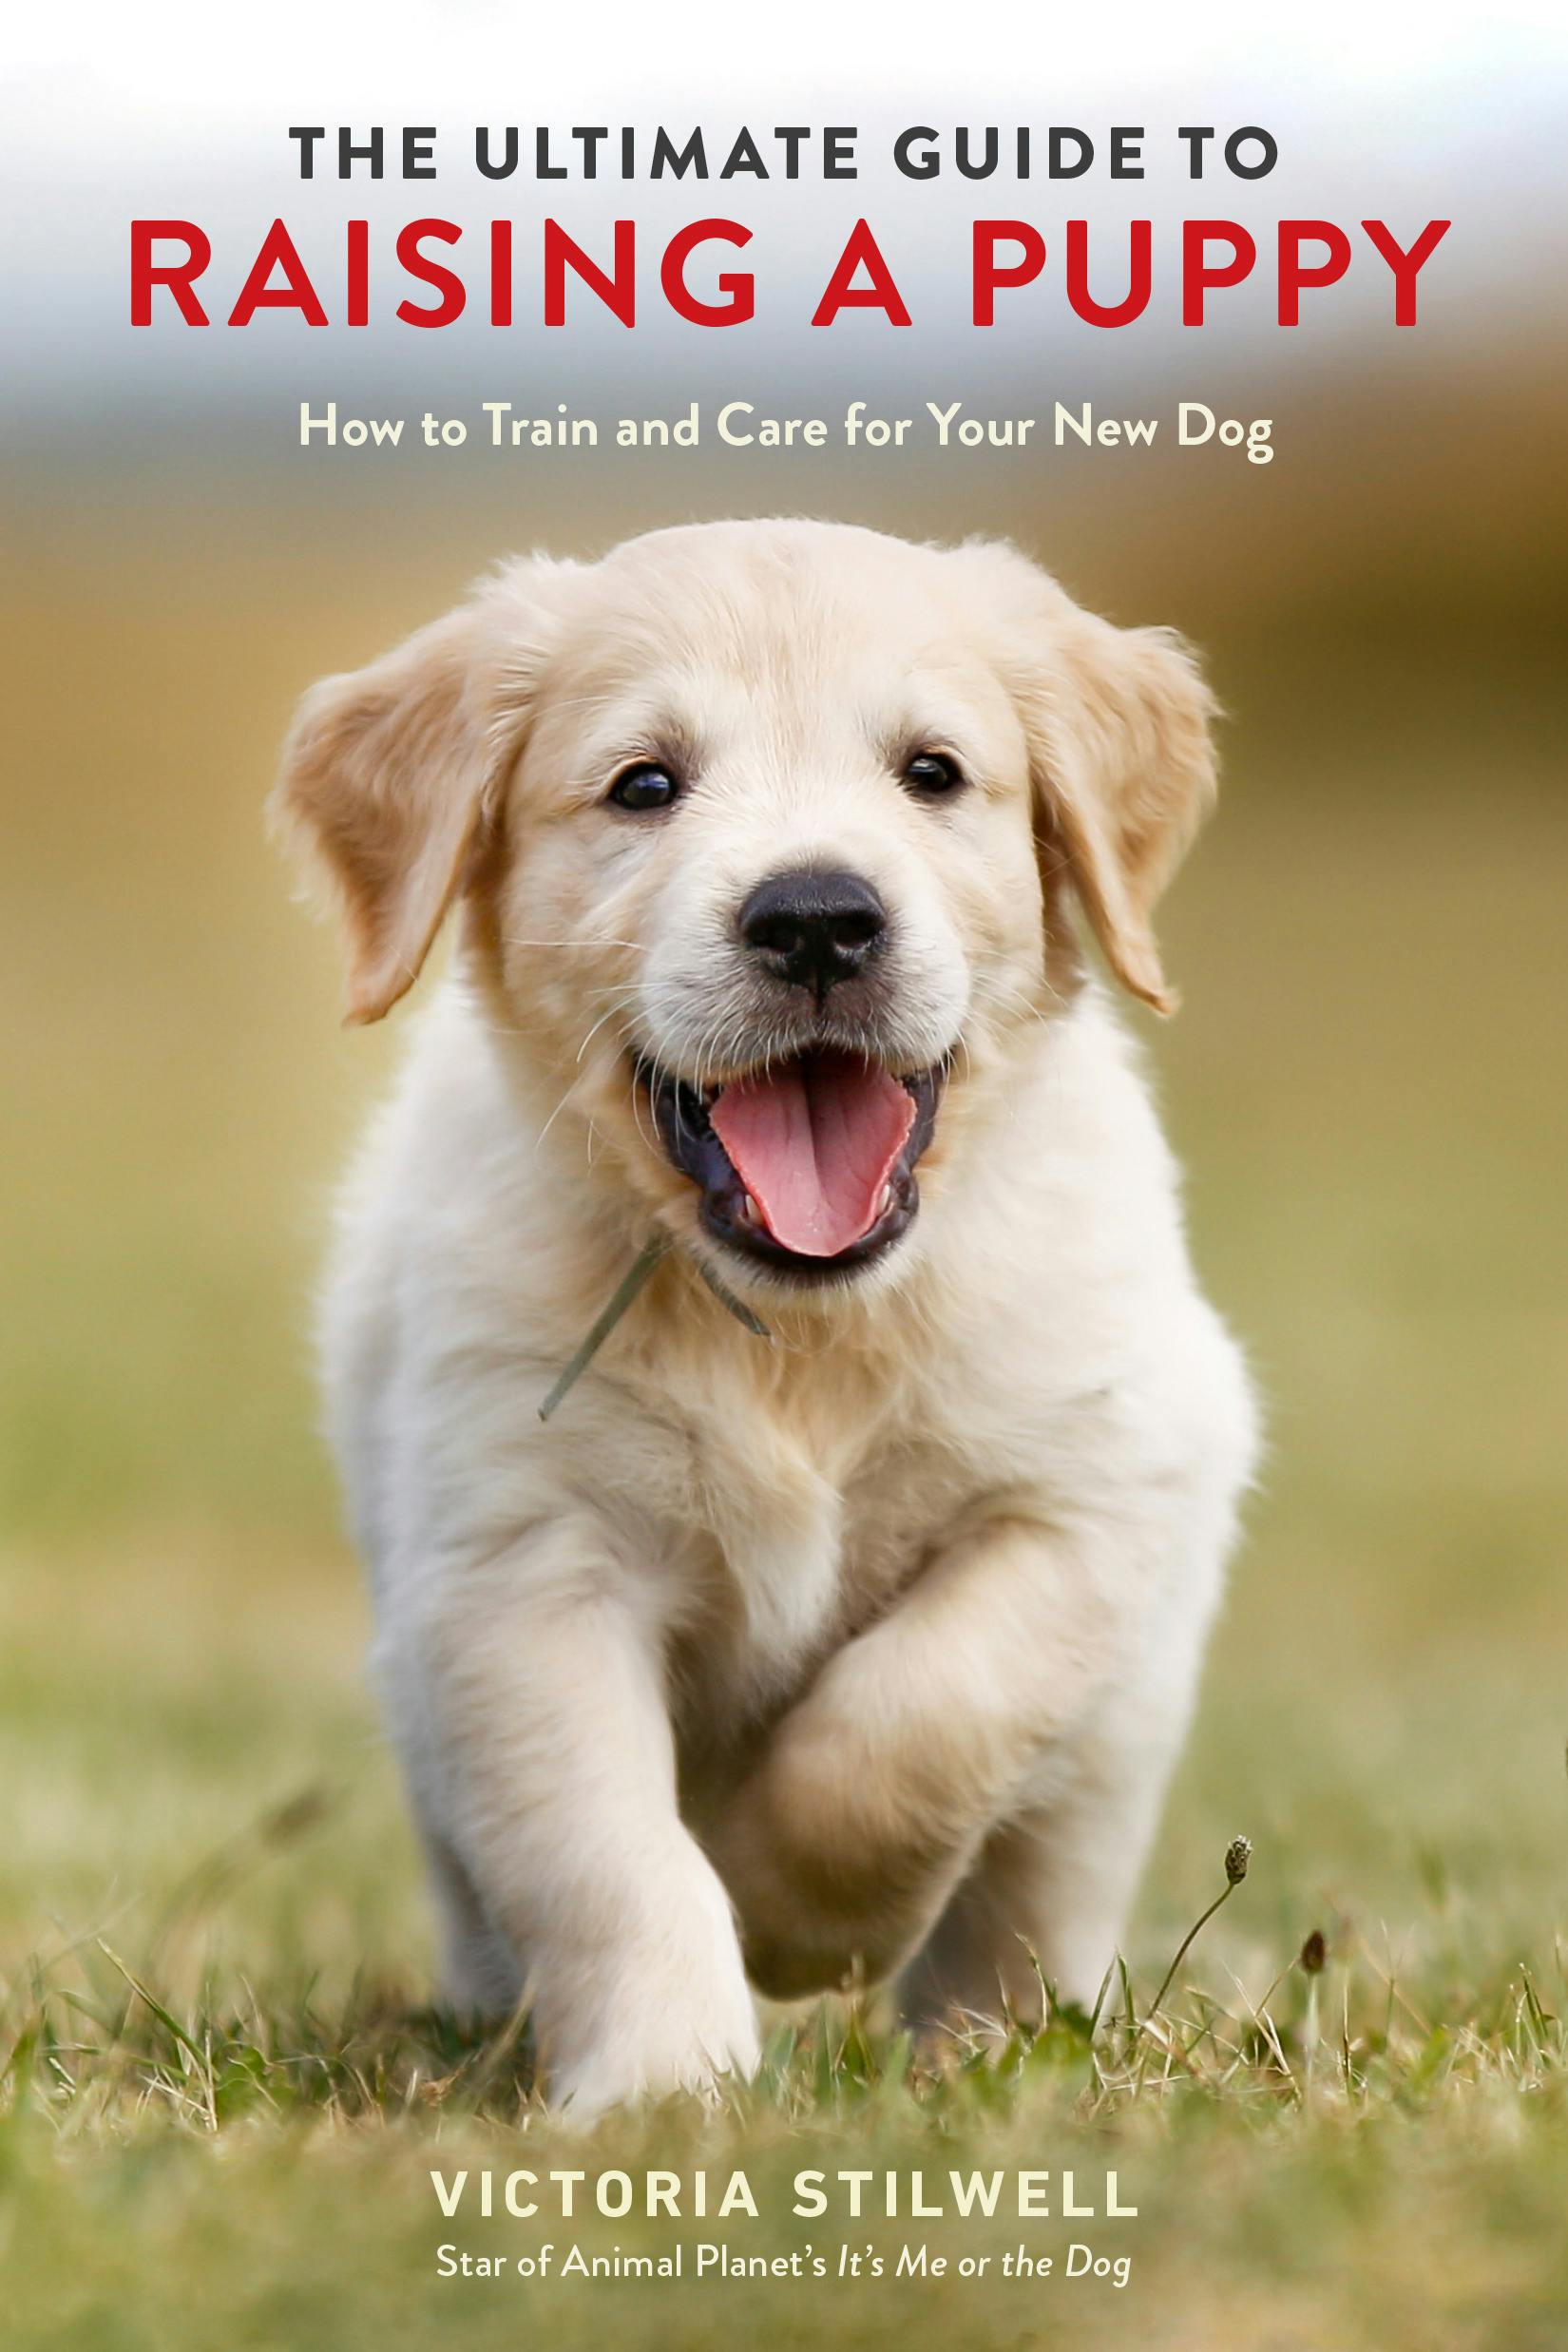 The Ultimate Guide to Raising a Puppy book cover